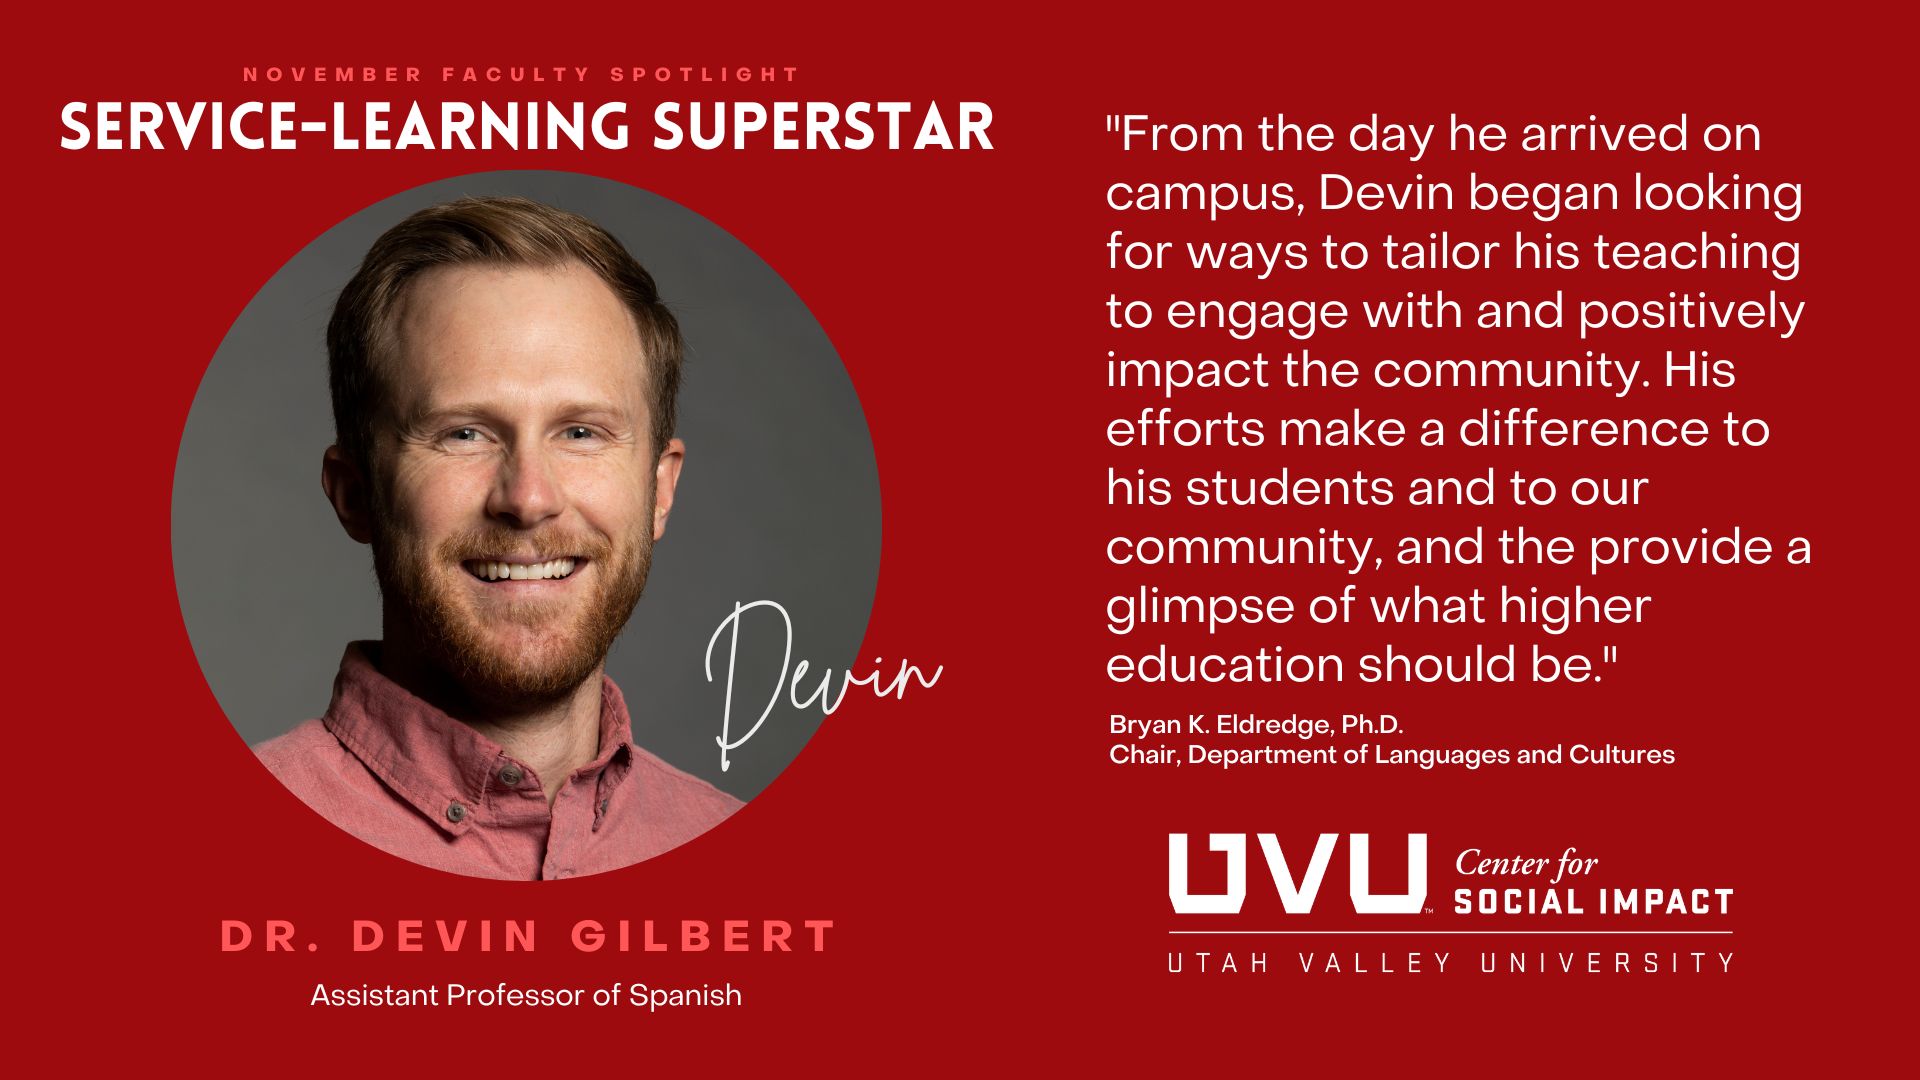 Dr. Gilbert's department chair, Dr. Bryan K. Eldredge, says this about Devin:  "From the day he arrived on campus, Devin began looking for ways to tailor his teaching to engage with and positively impact the community. His efforts make a difference to his students and to our community, and the provide a glimpse of what higher education should be."